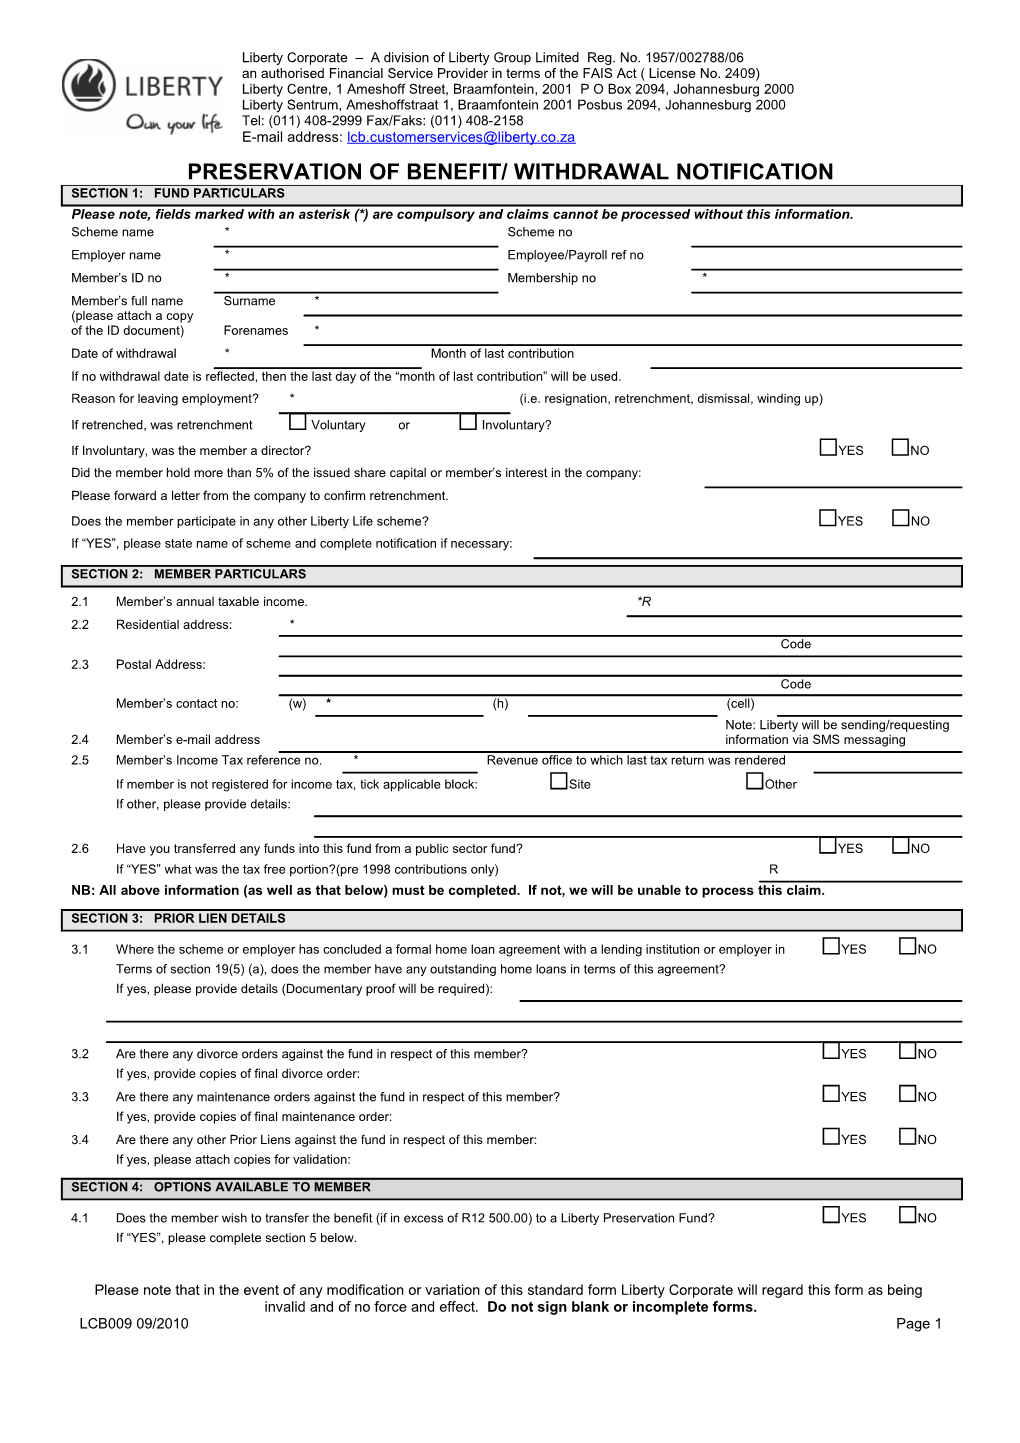 Letter Template (Liberty Corporate Benefits)